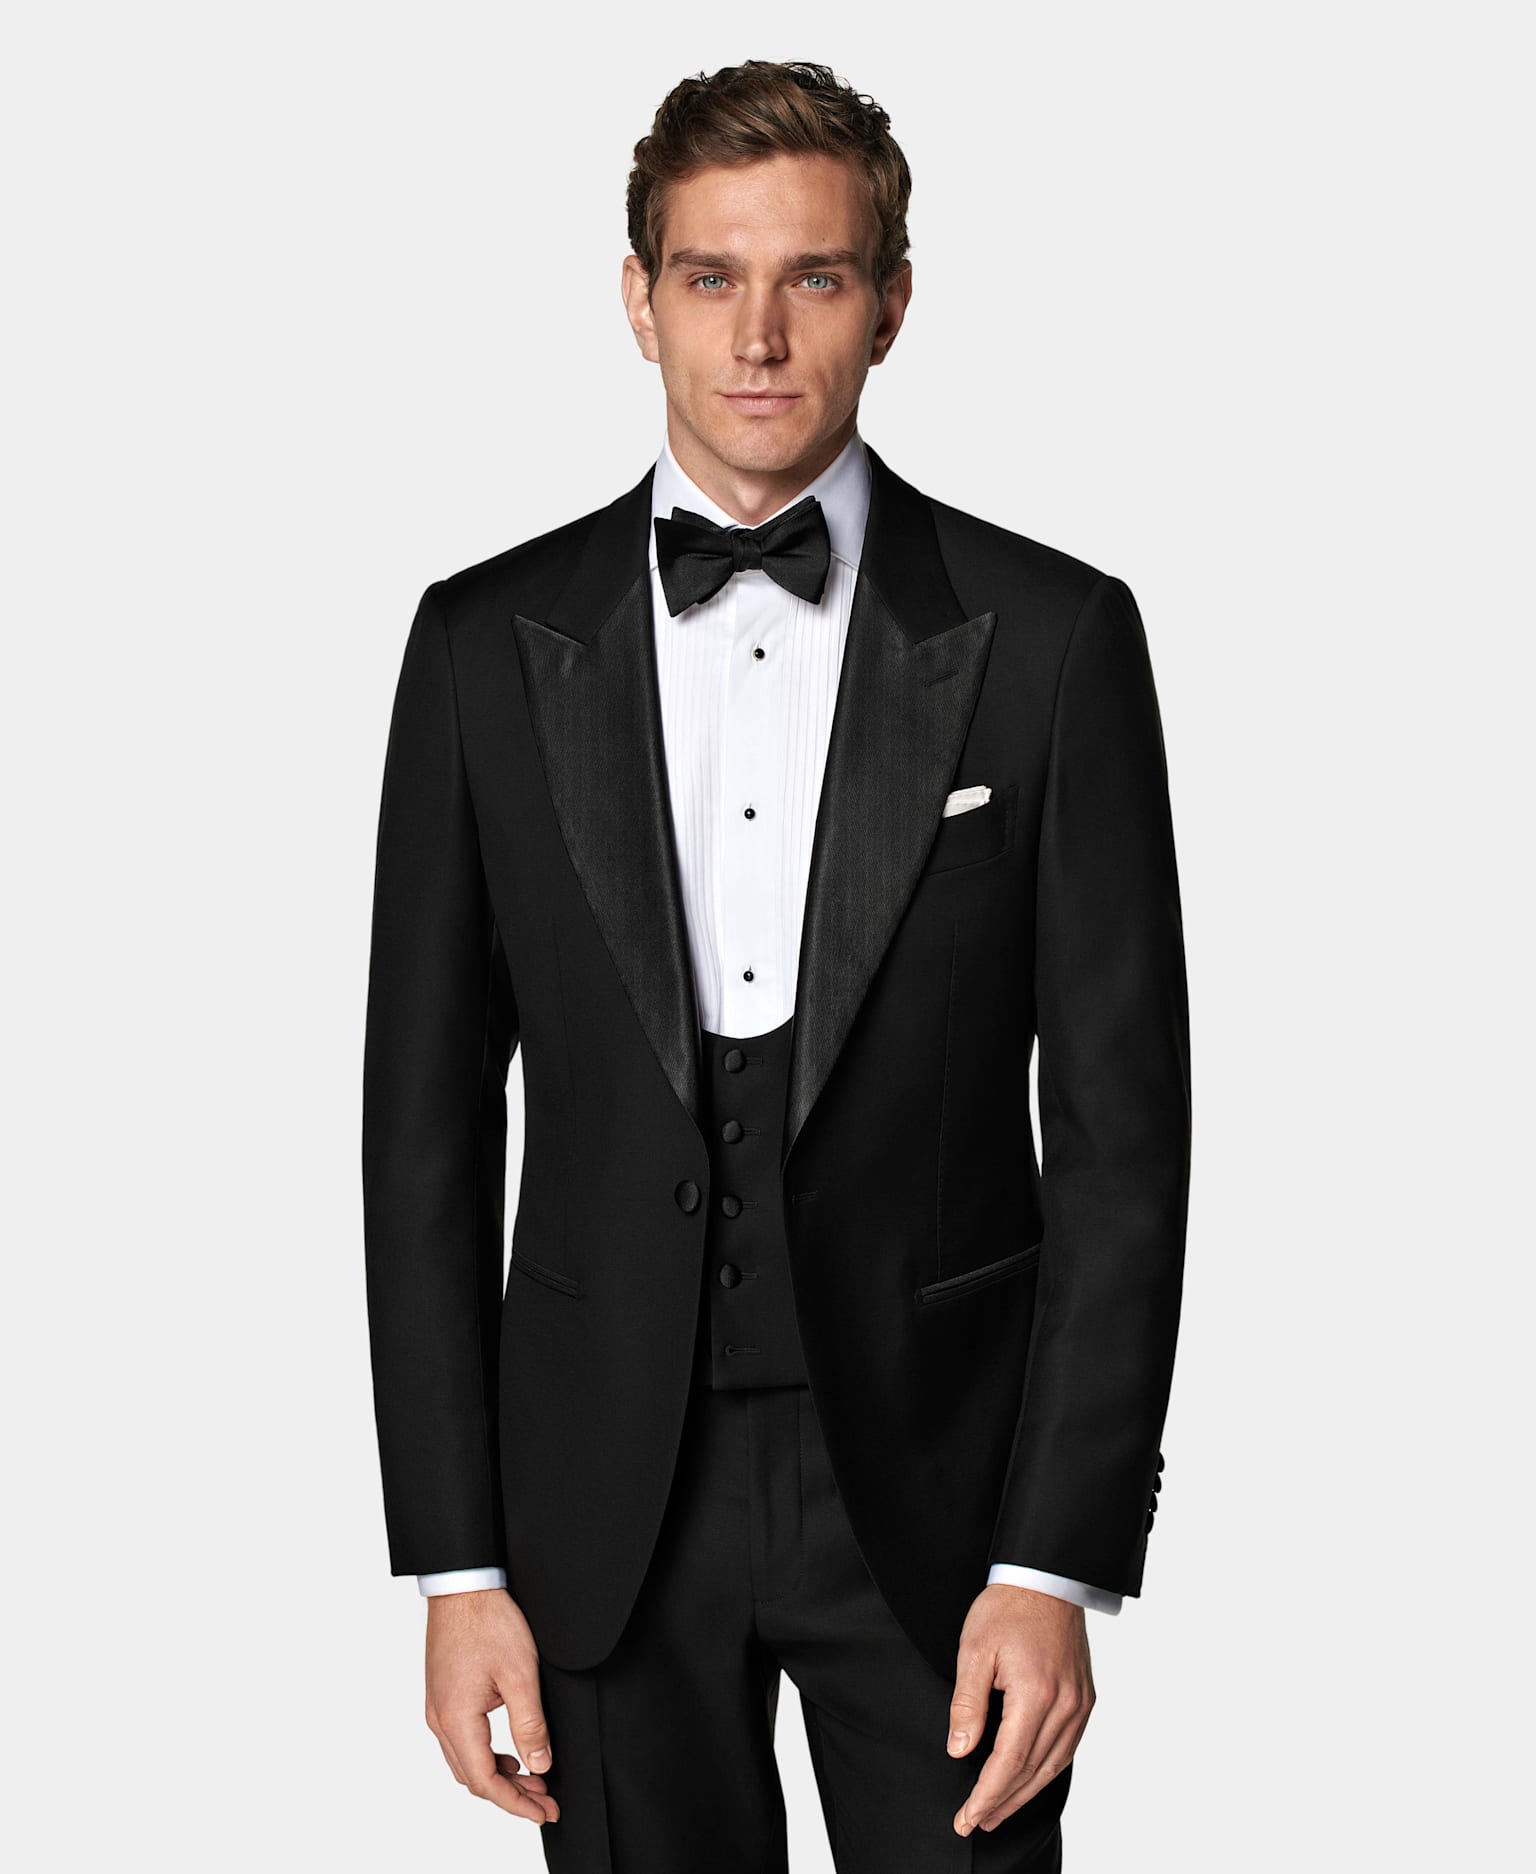 Black tuxedo with pleated shirt and black bow tie.